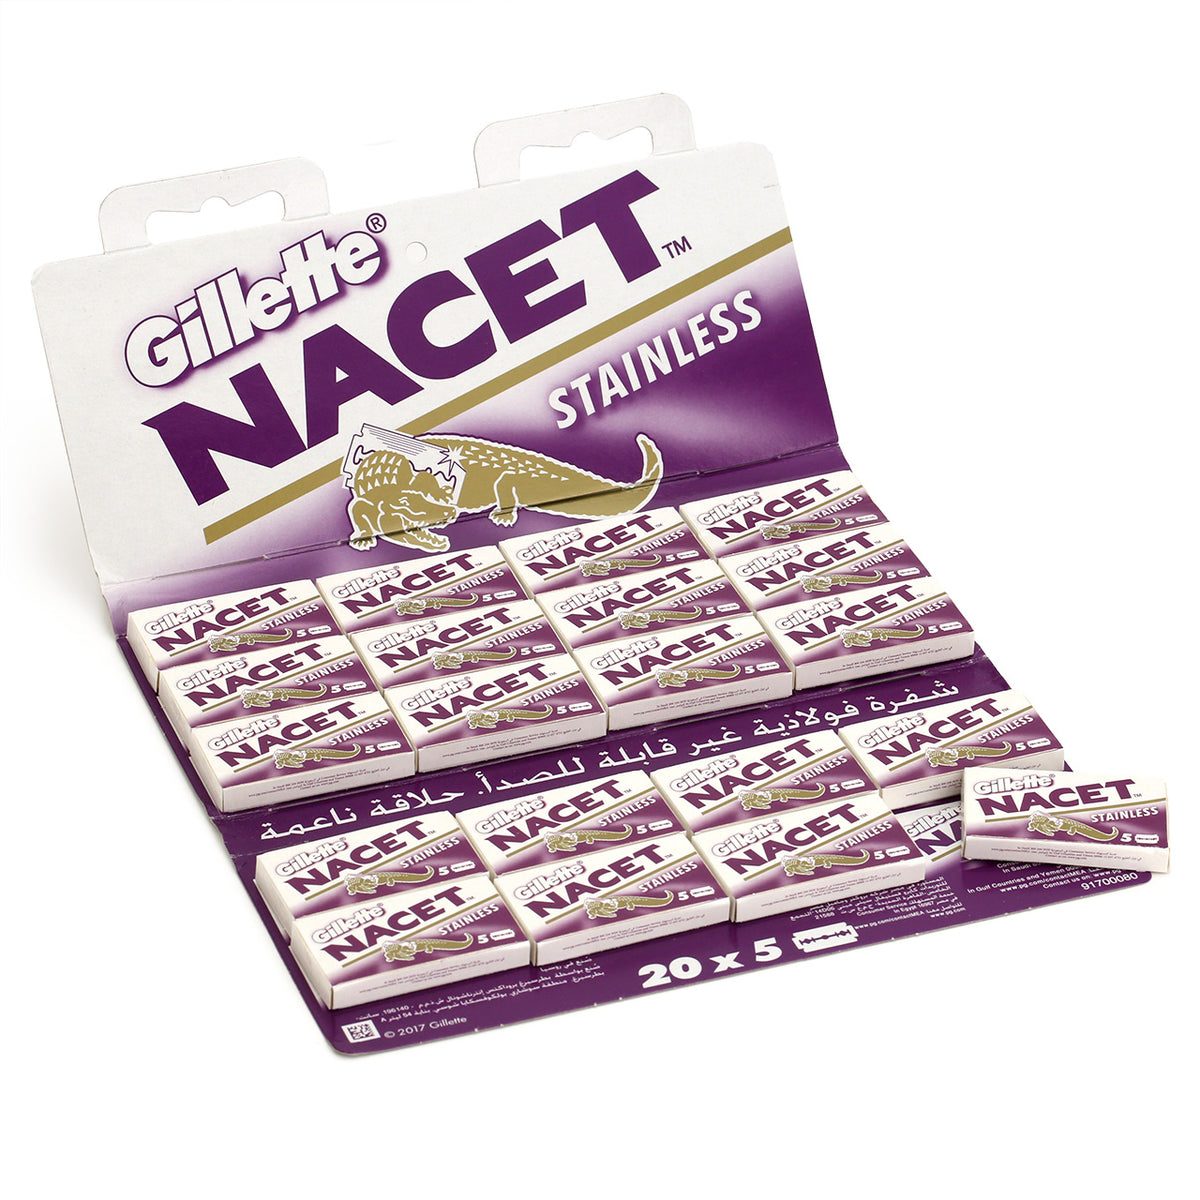 DE blades from Gillet Nacet - Stainless. Fold-out pack of 20 tucks totalling 100 blades